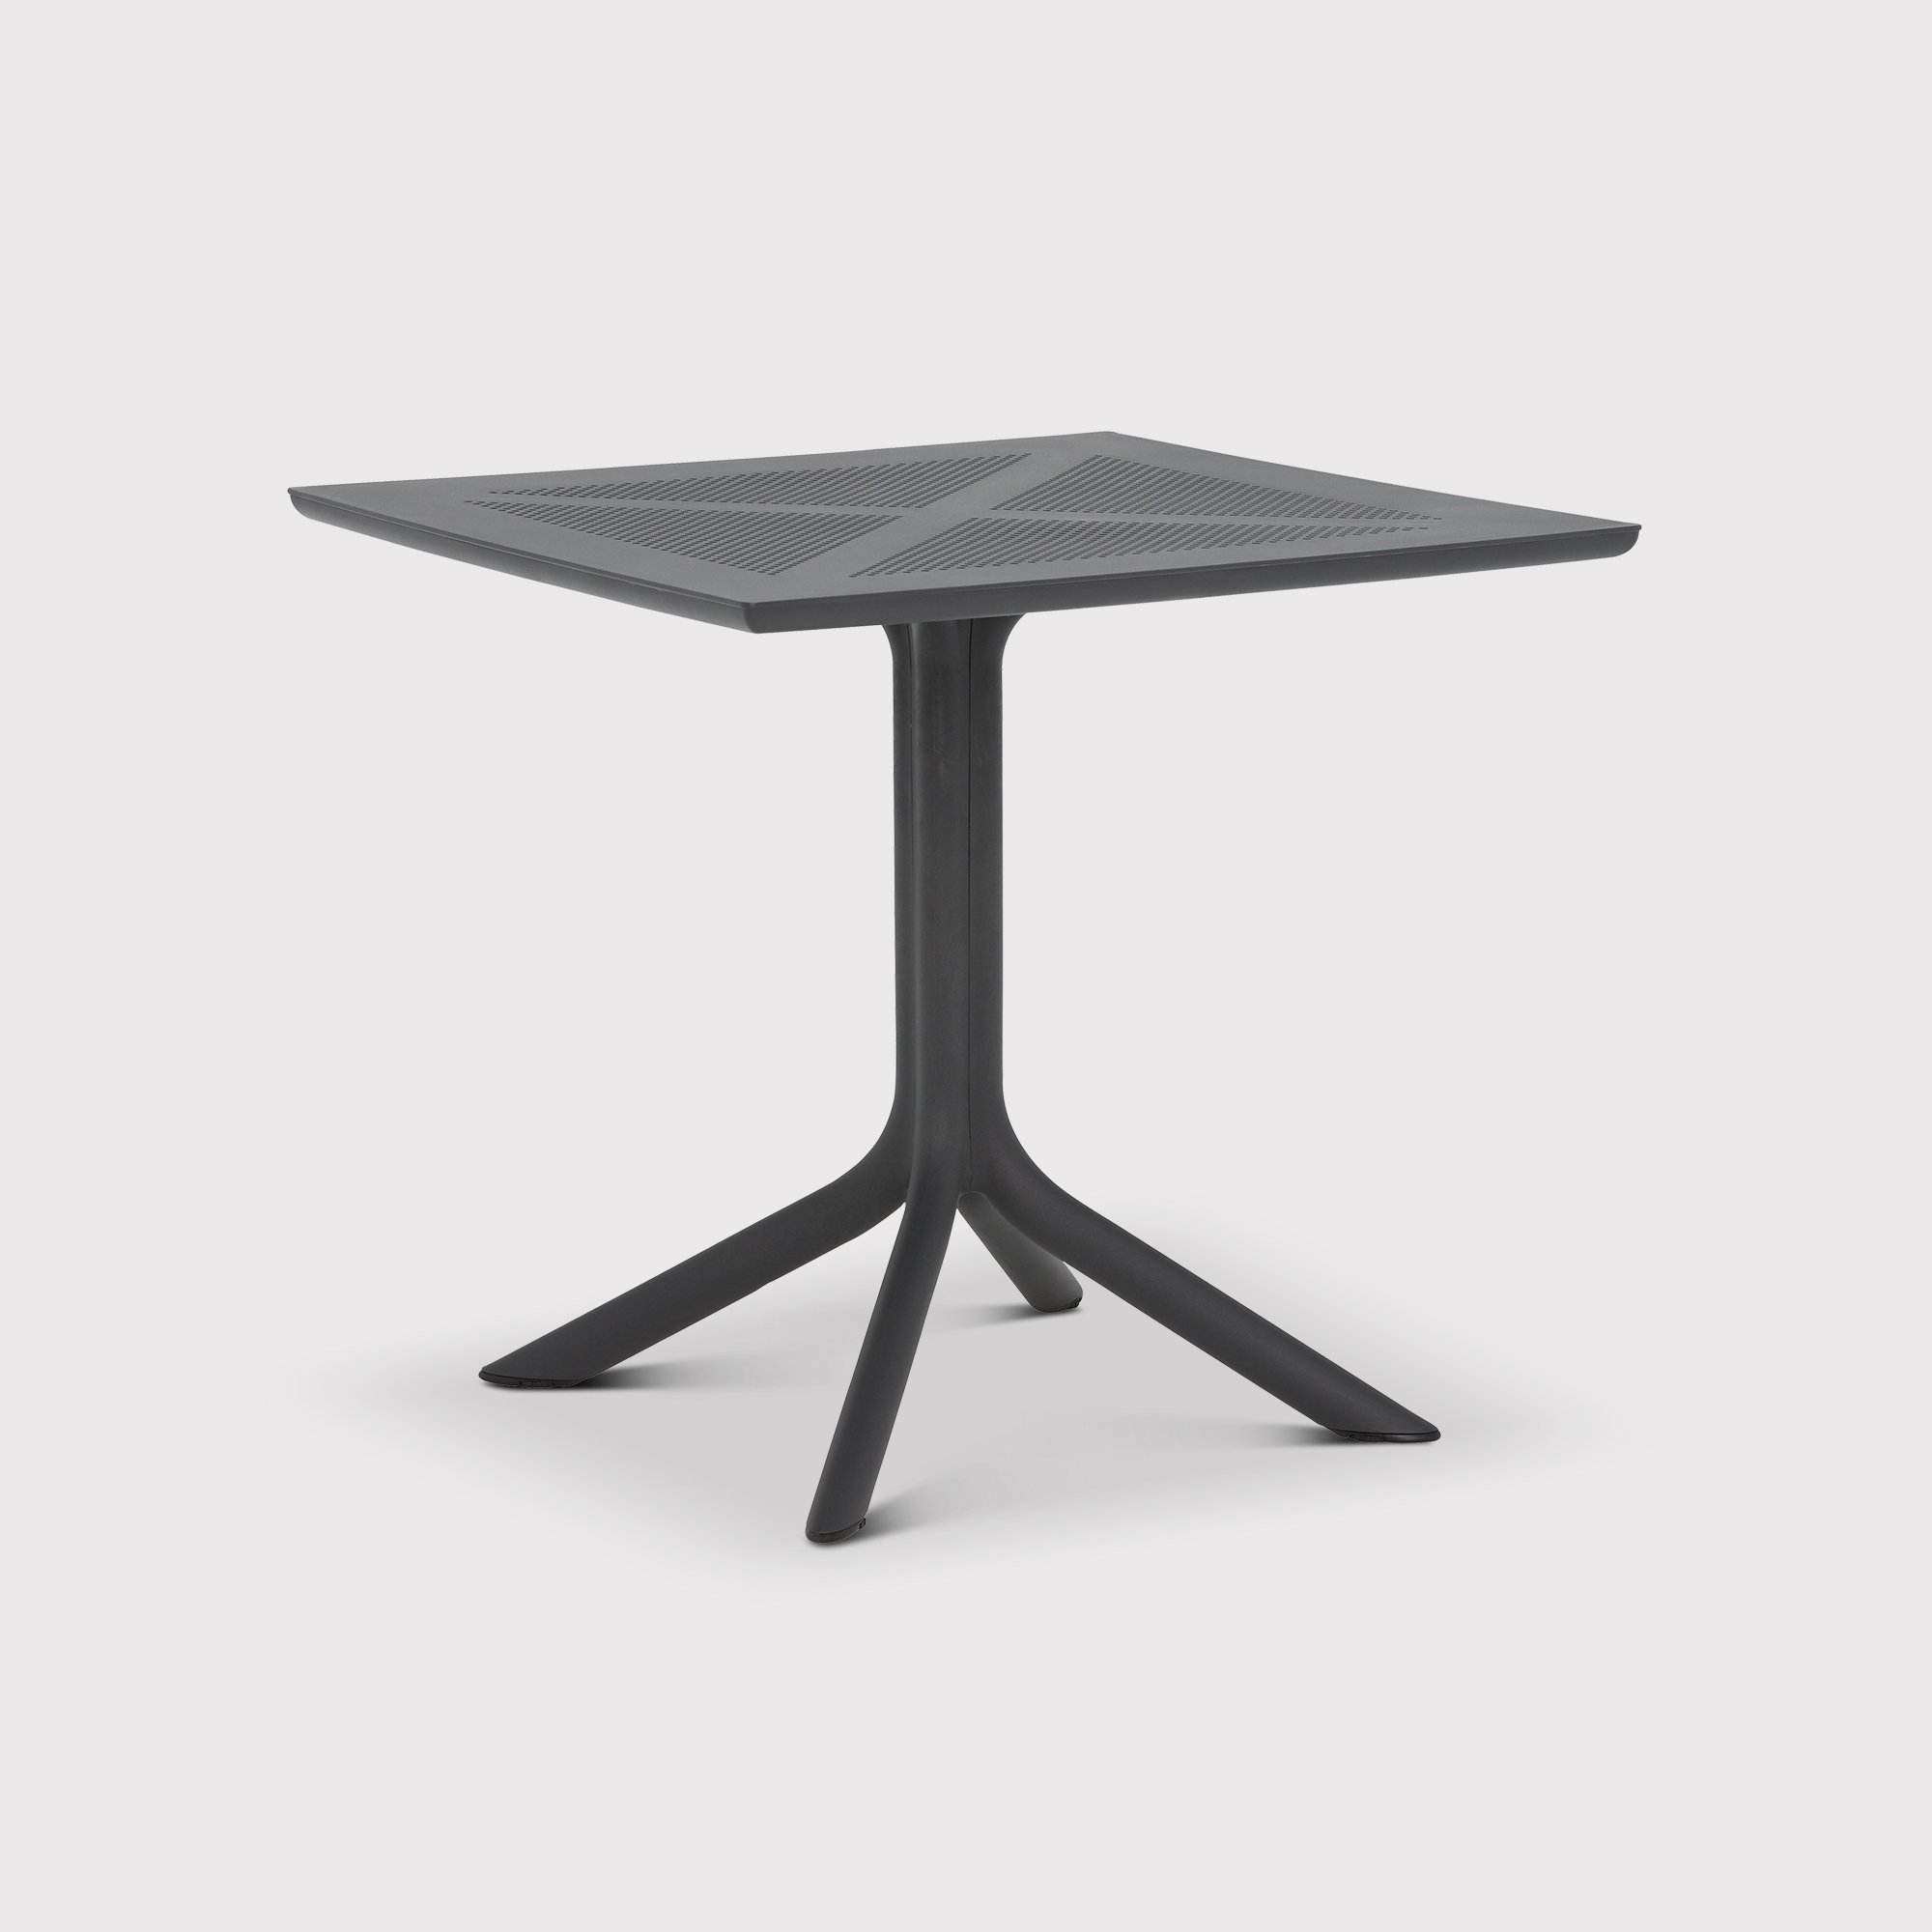 Pollux 80cm Dining Table, Black | Barker & Stonehouse